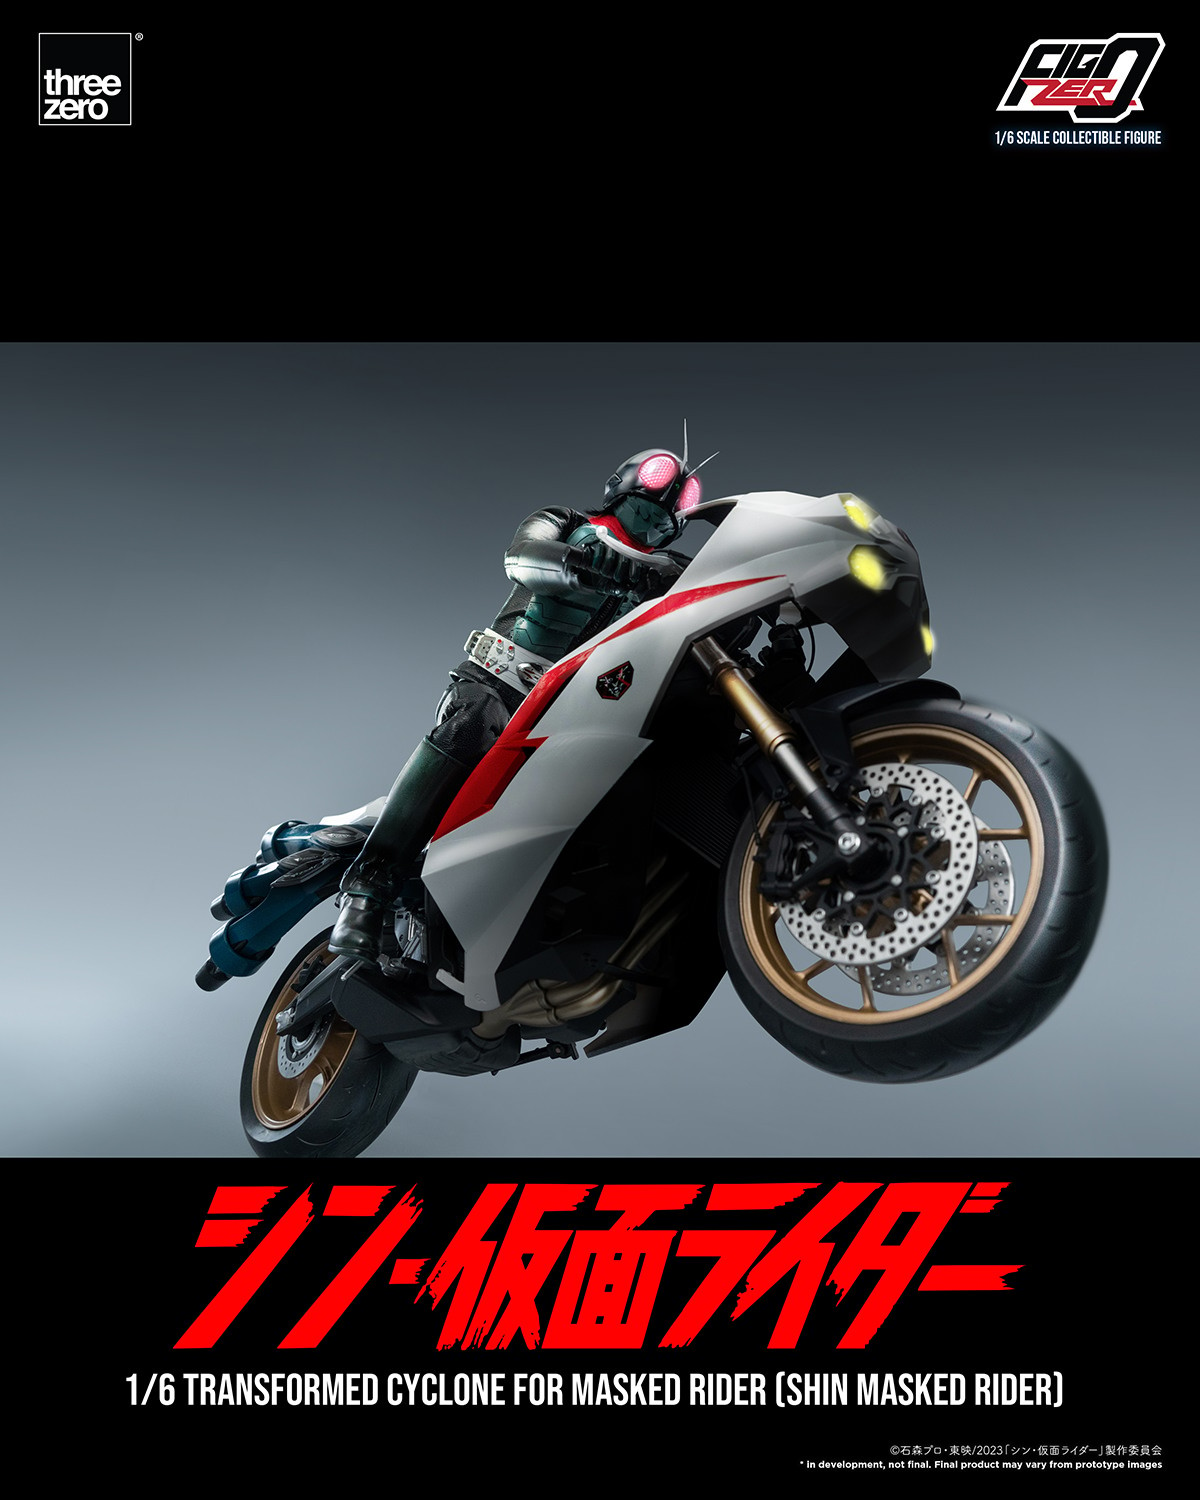 Transformed Cyclone for Masked Rider (Shin Masked Rider) (Prototype Shown) View 23